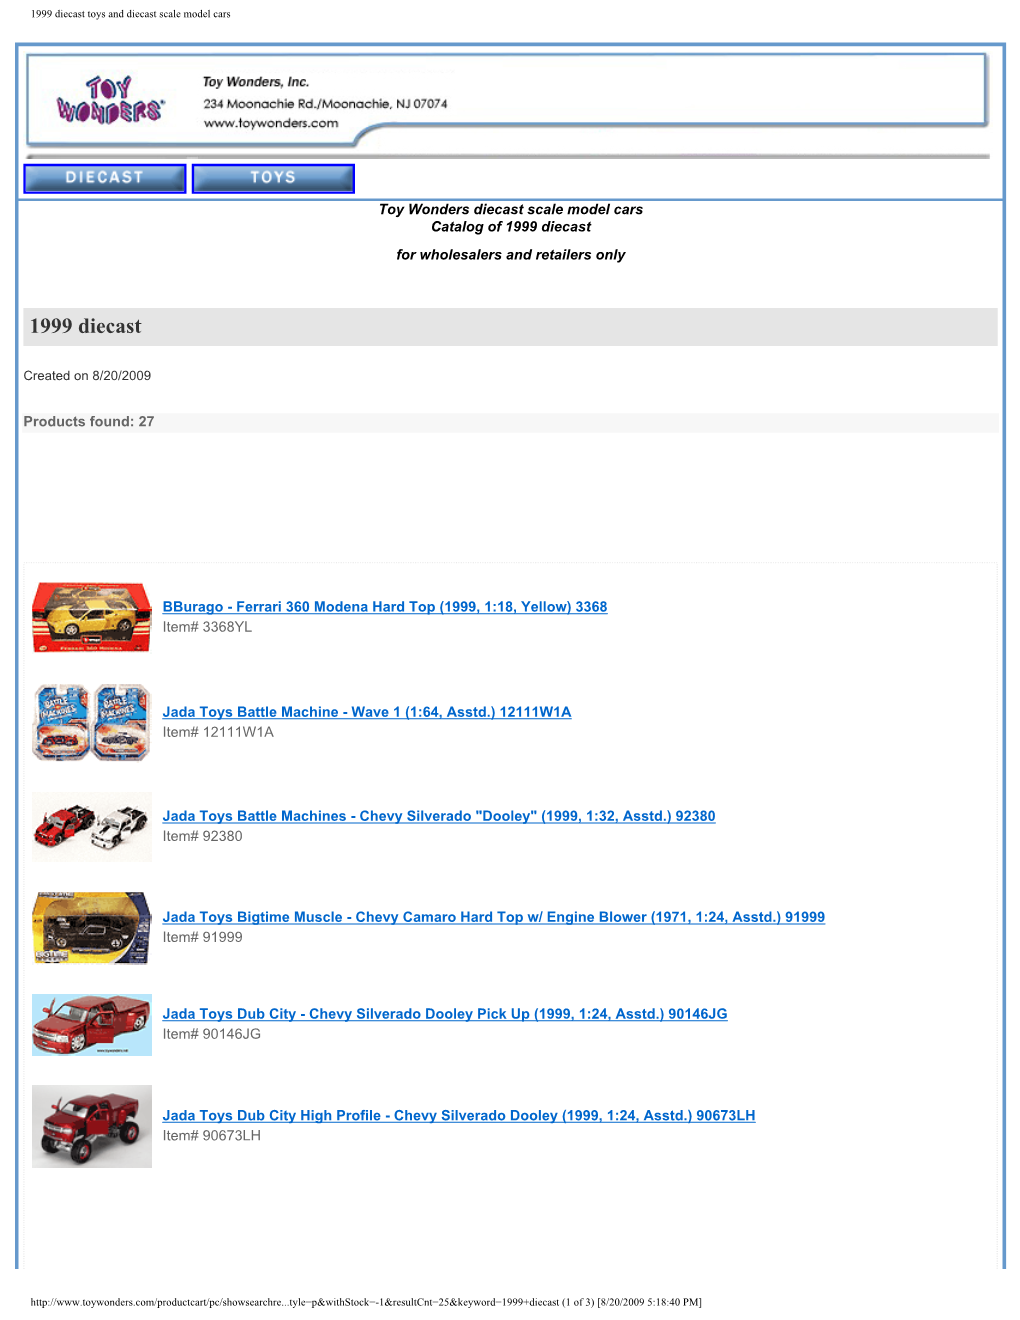 1999 Diecast Toys and Diecast Scale Model Cars